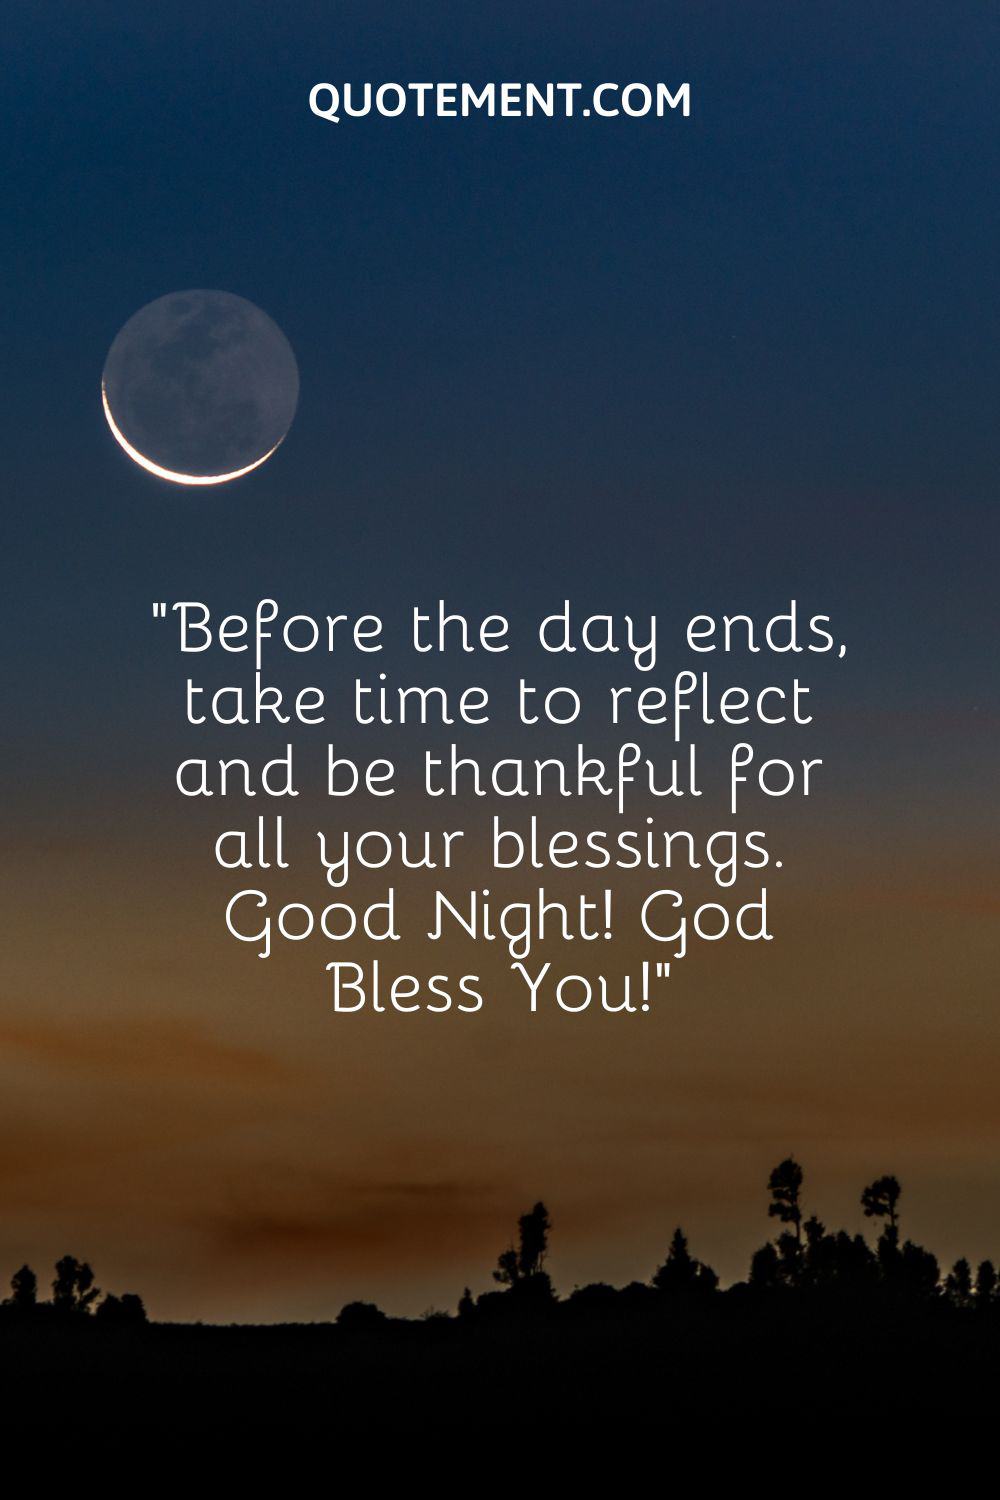 Before the day ends, take time to reflect and be thankful for all your blessings.